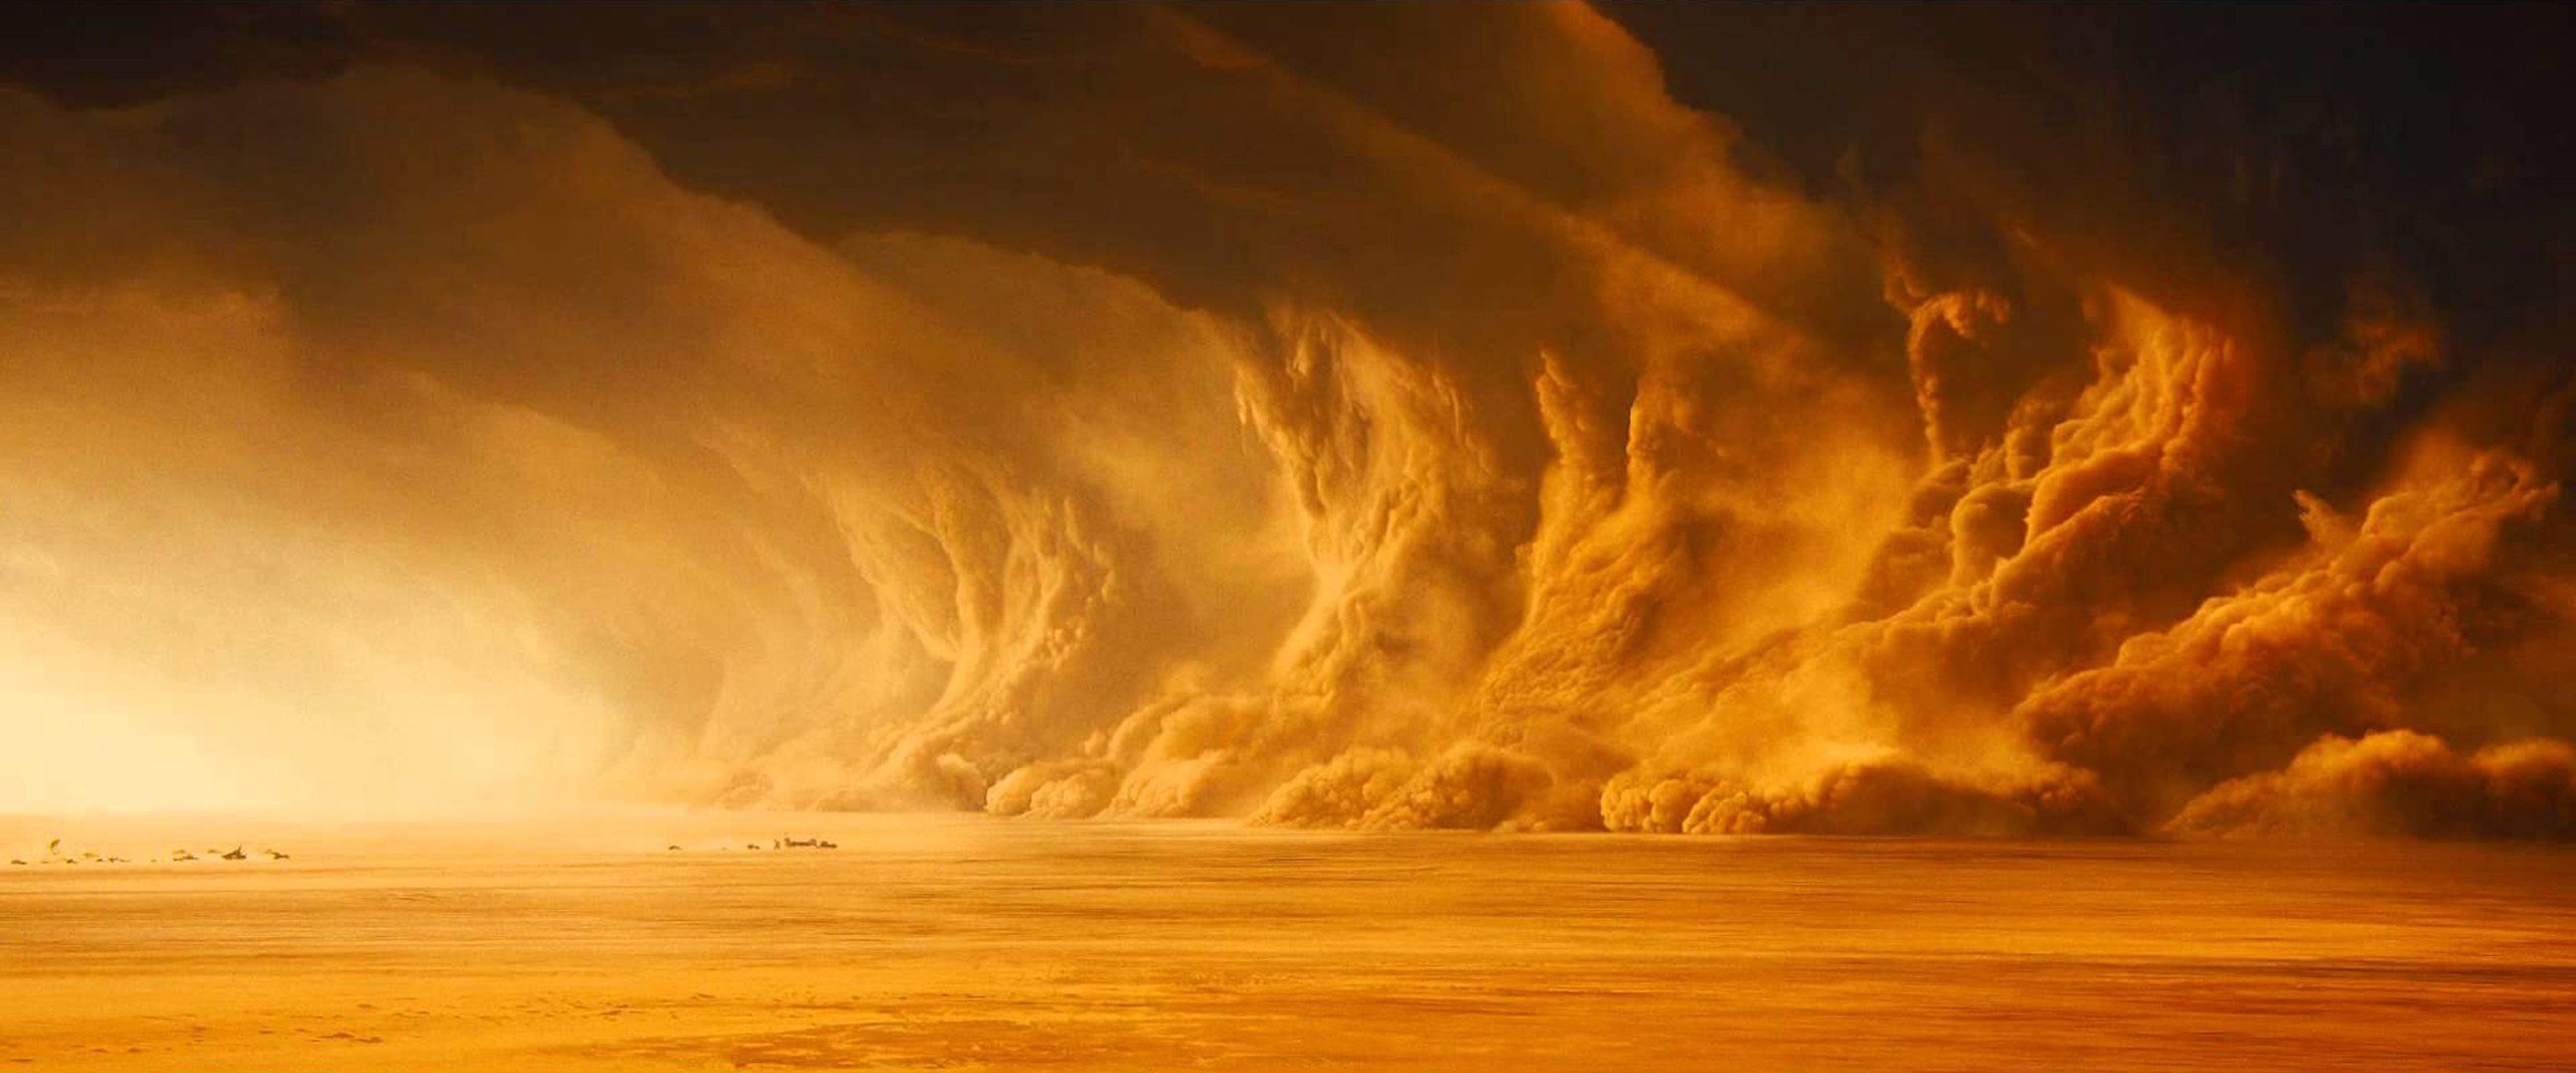 sandstorms, Mad Max: Fury Road Wallpapers HD / Desktop and Mobile